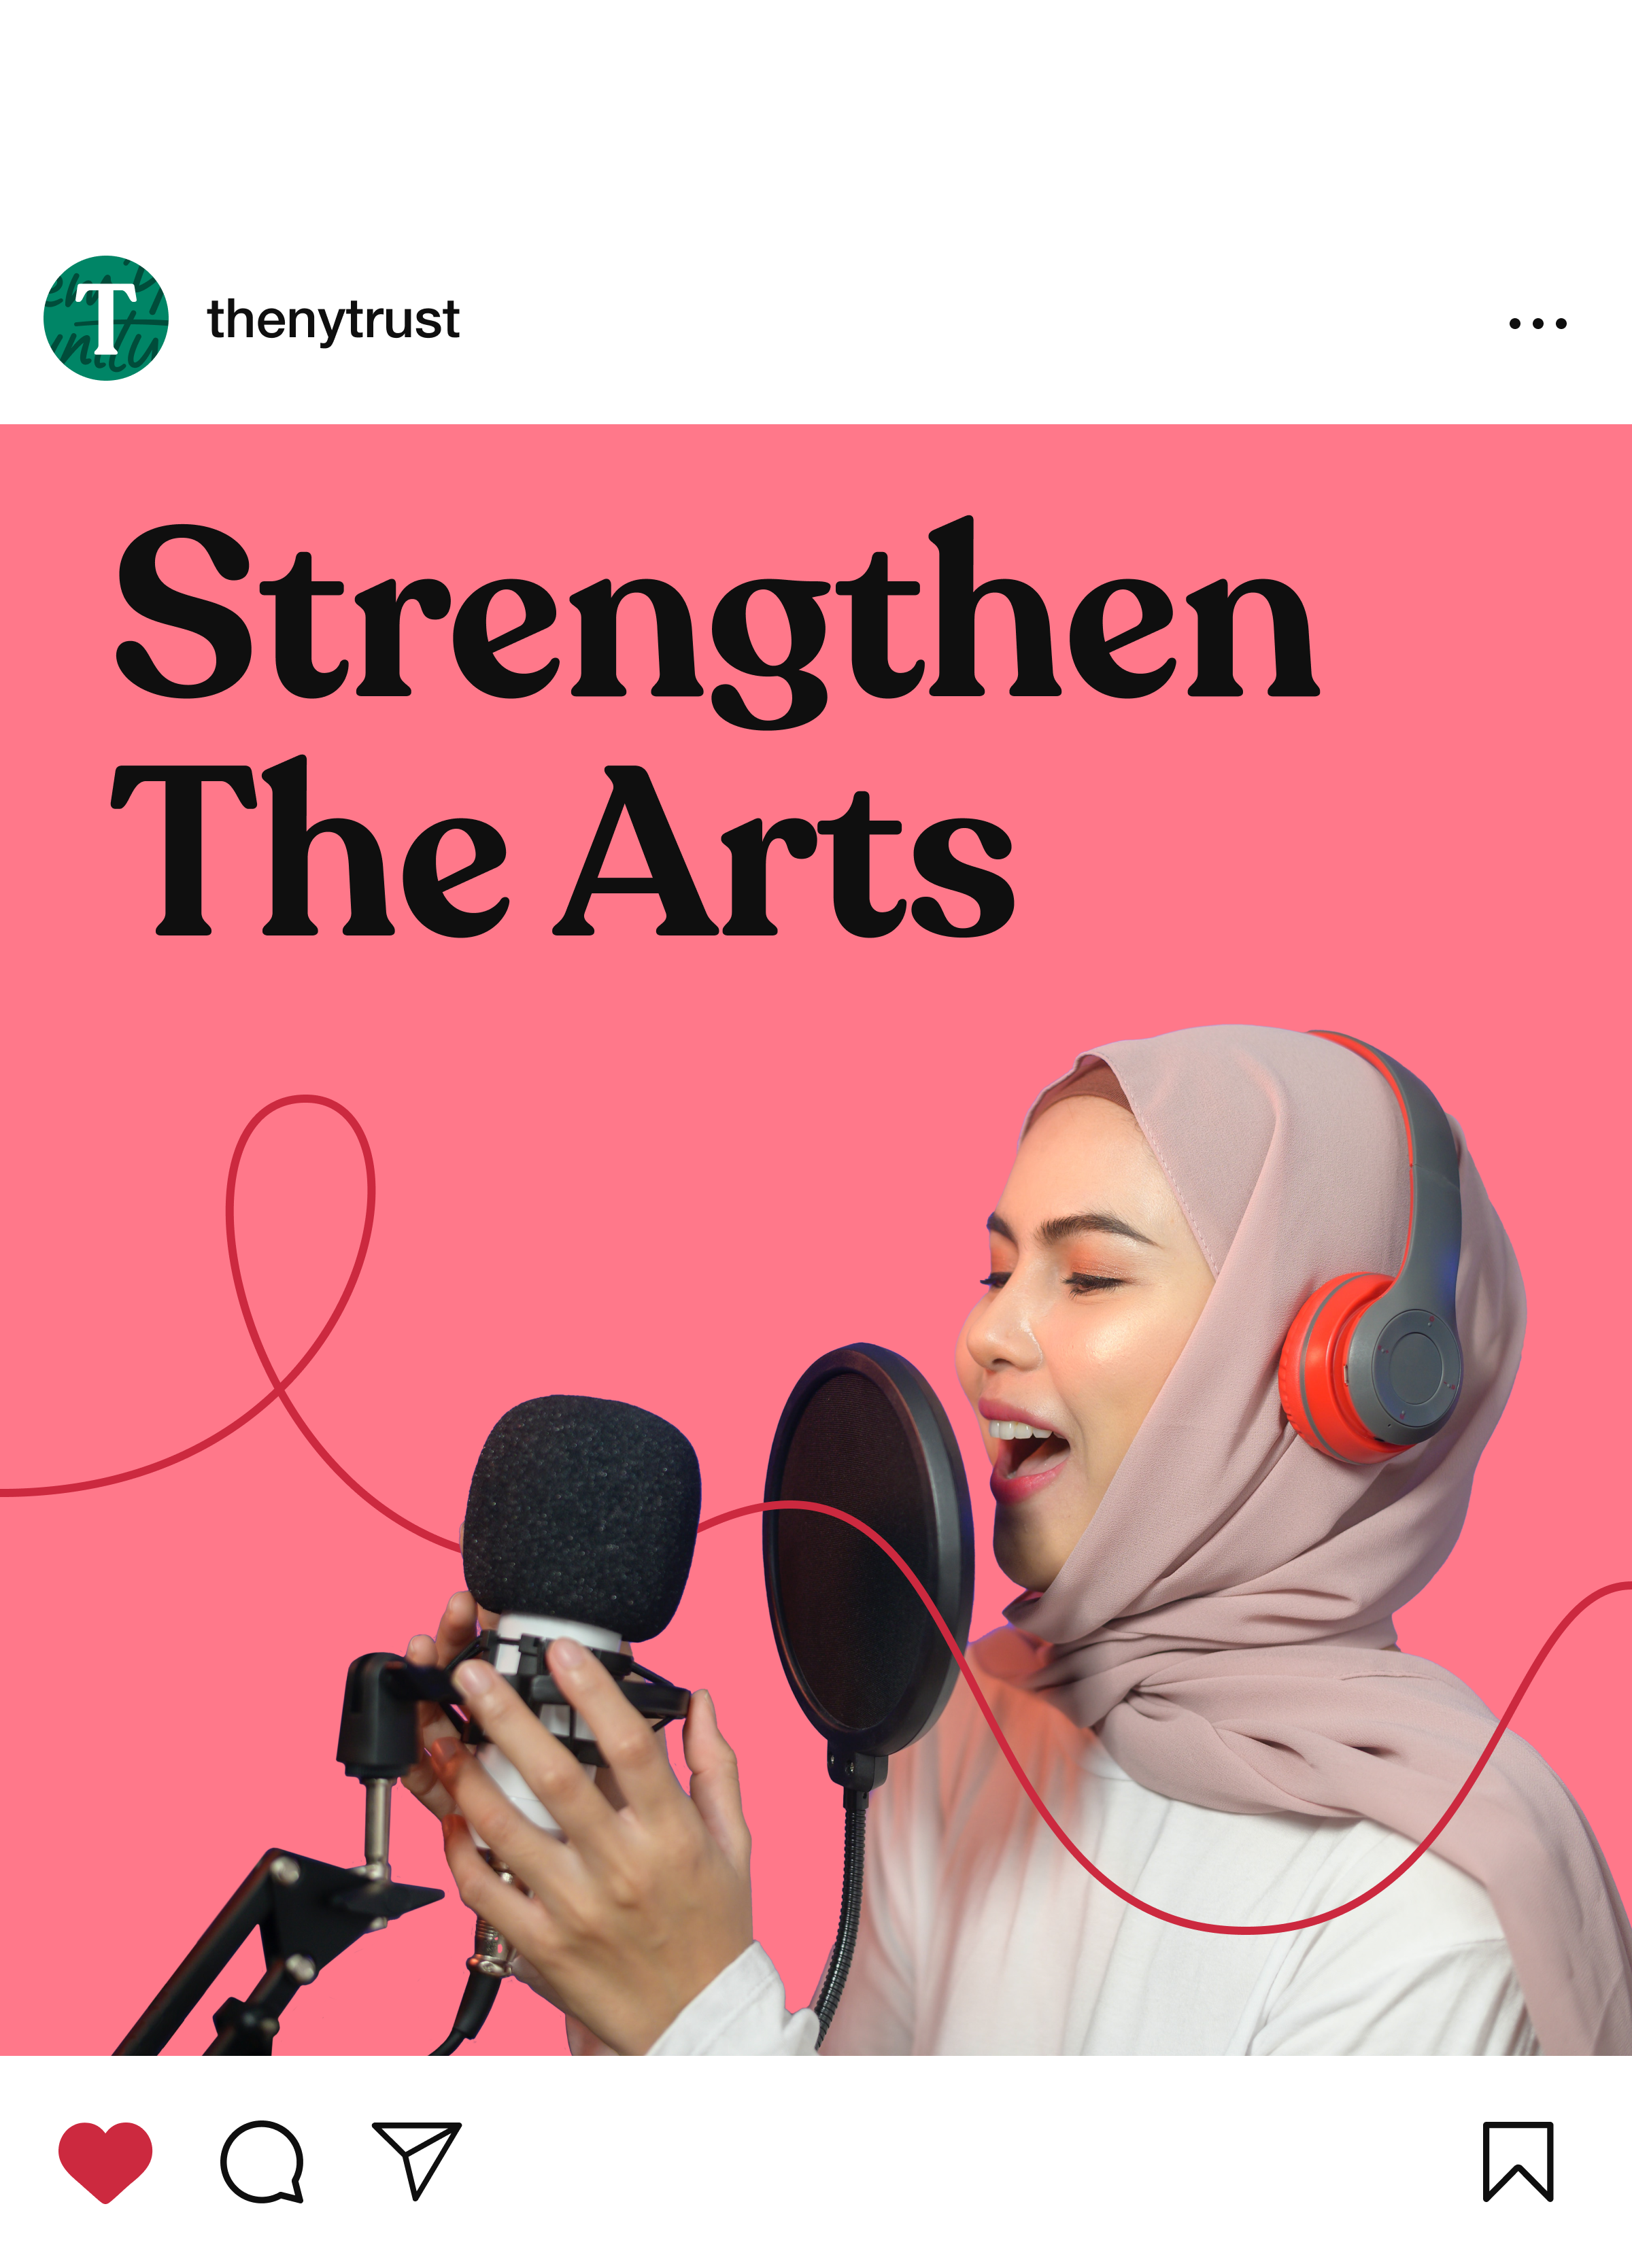 A woman in a hijab sings into a microphone while wearing headphones. Text on the image reads "Strengthen The Arts." The Instagram post is from the account "@thenytrust" and has a bright pink background with a red squiggly line connecting the microphone and headphones.